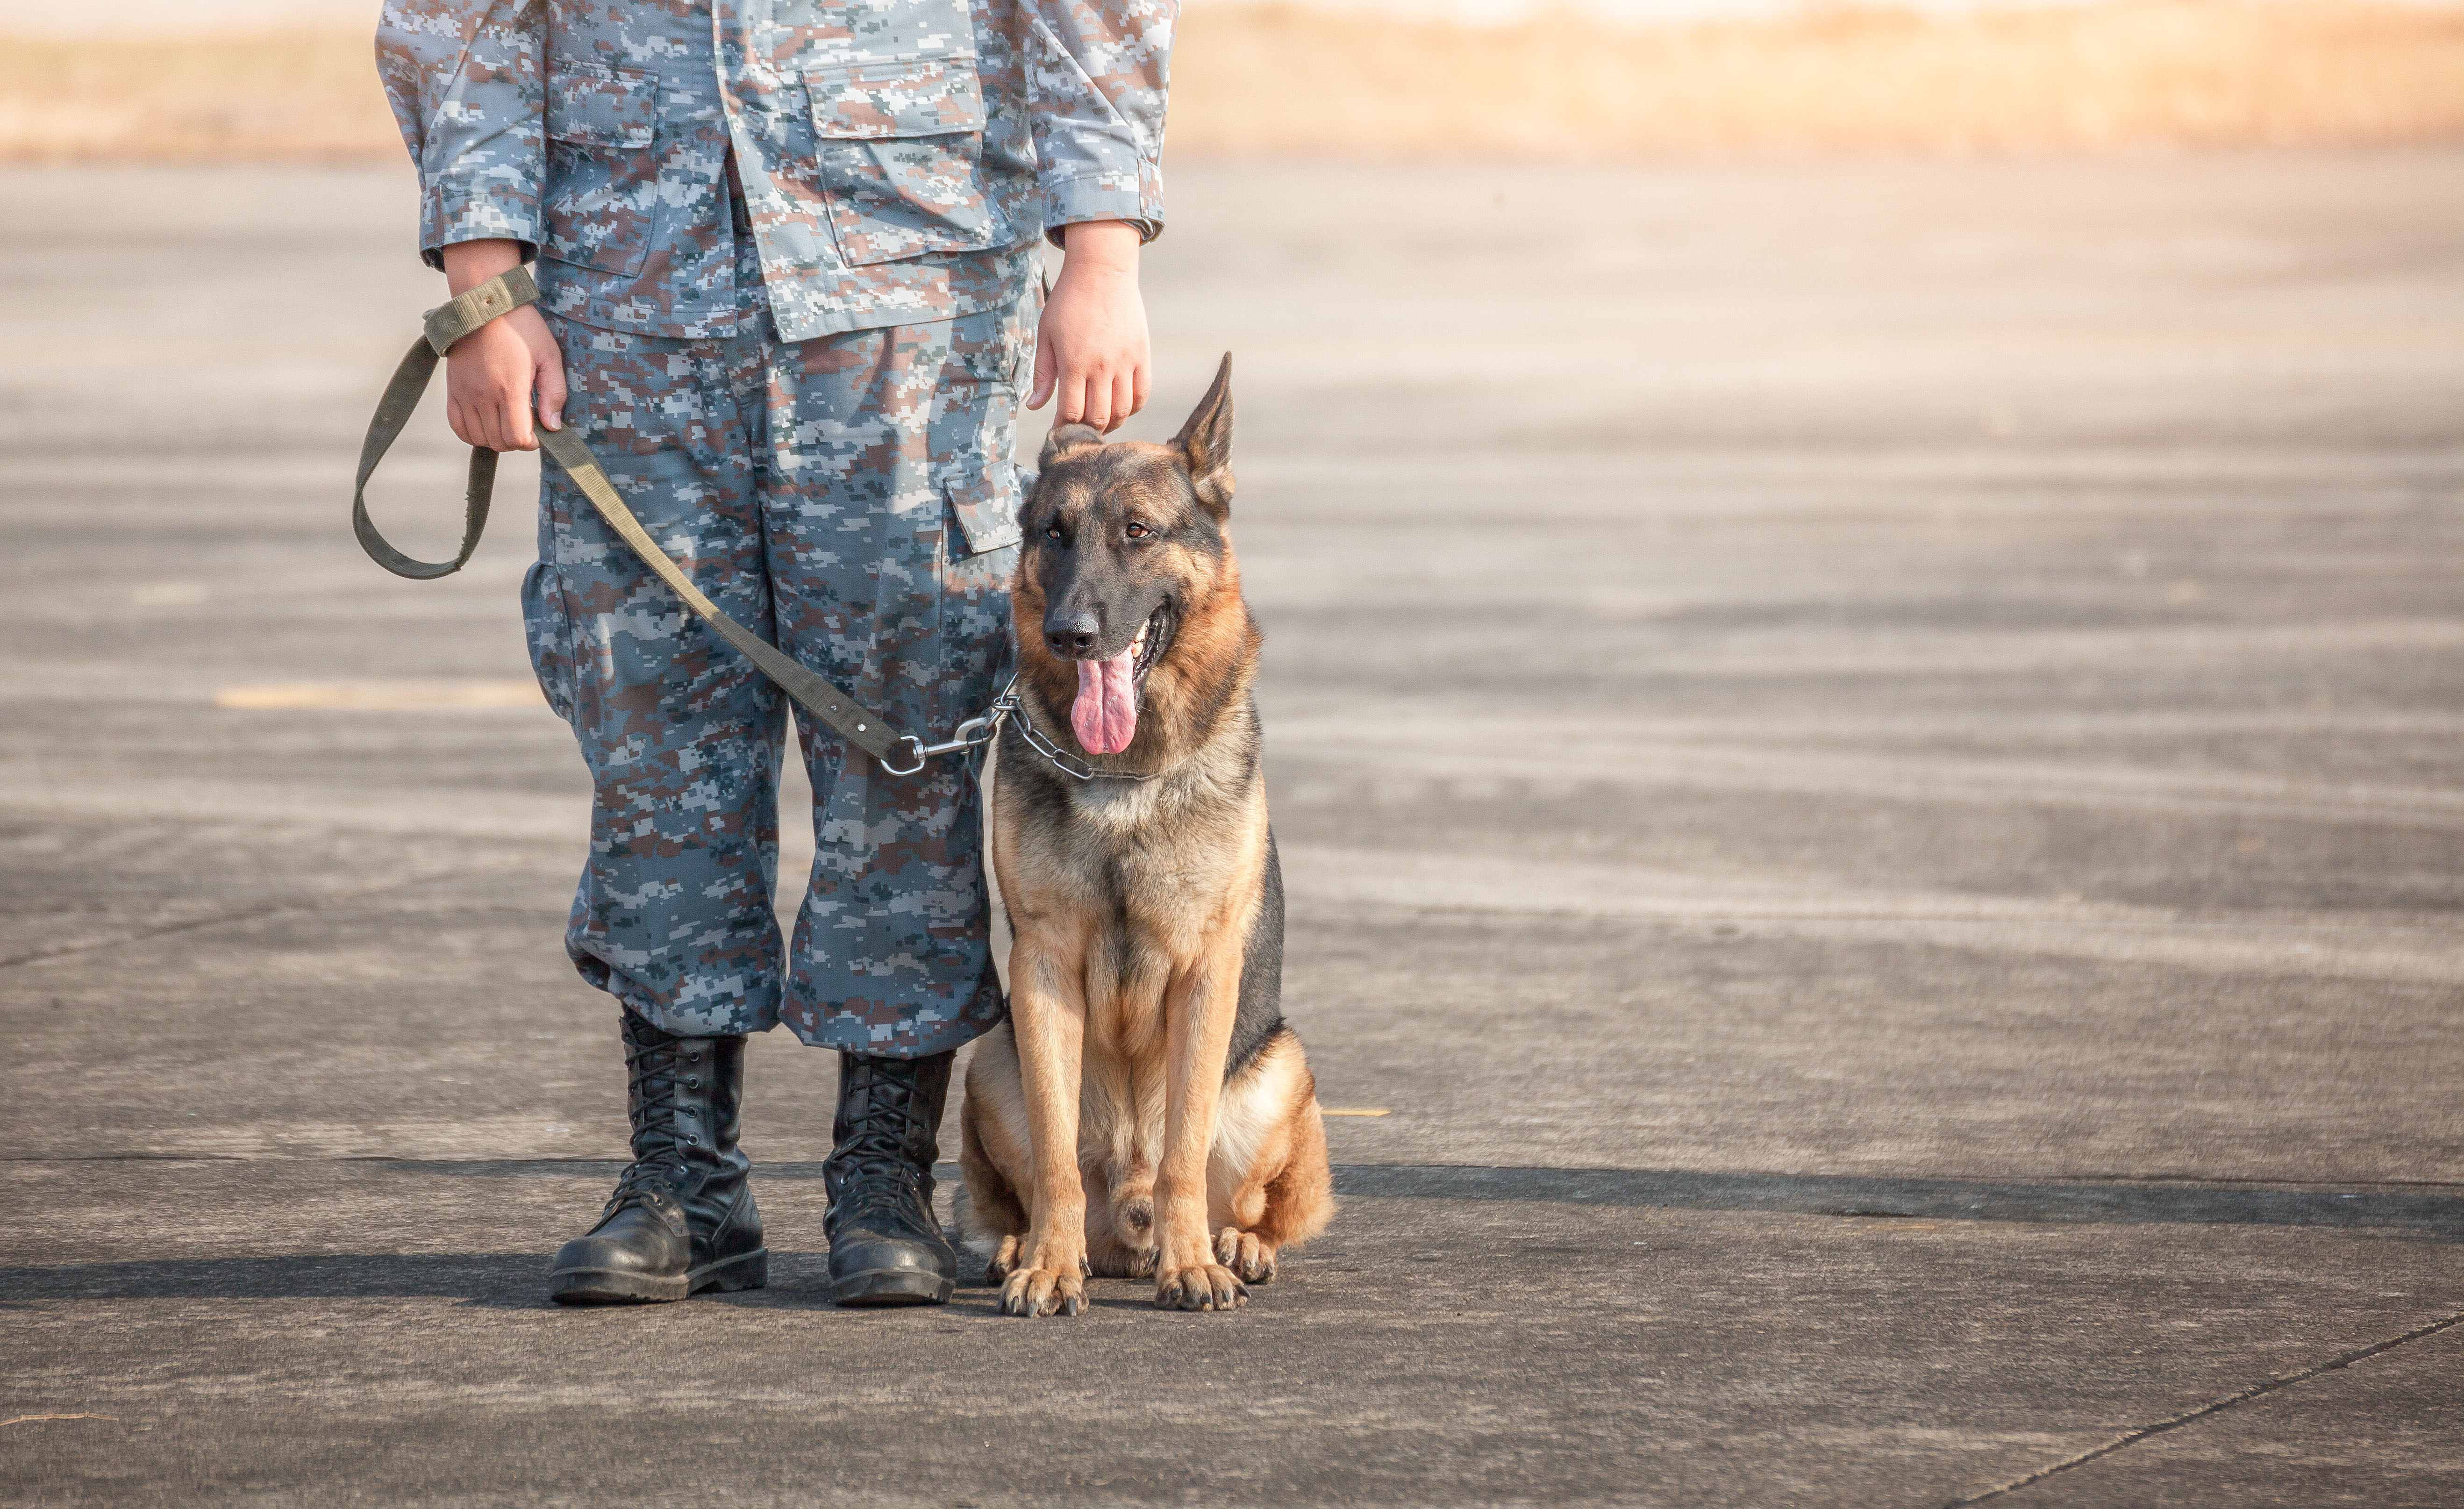 A Dog Training Elite dog trainer with military experience standing next to an obediant dog.